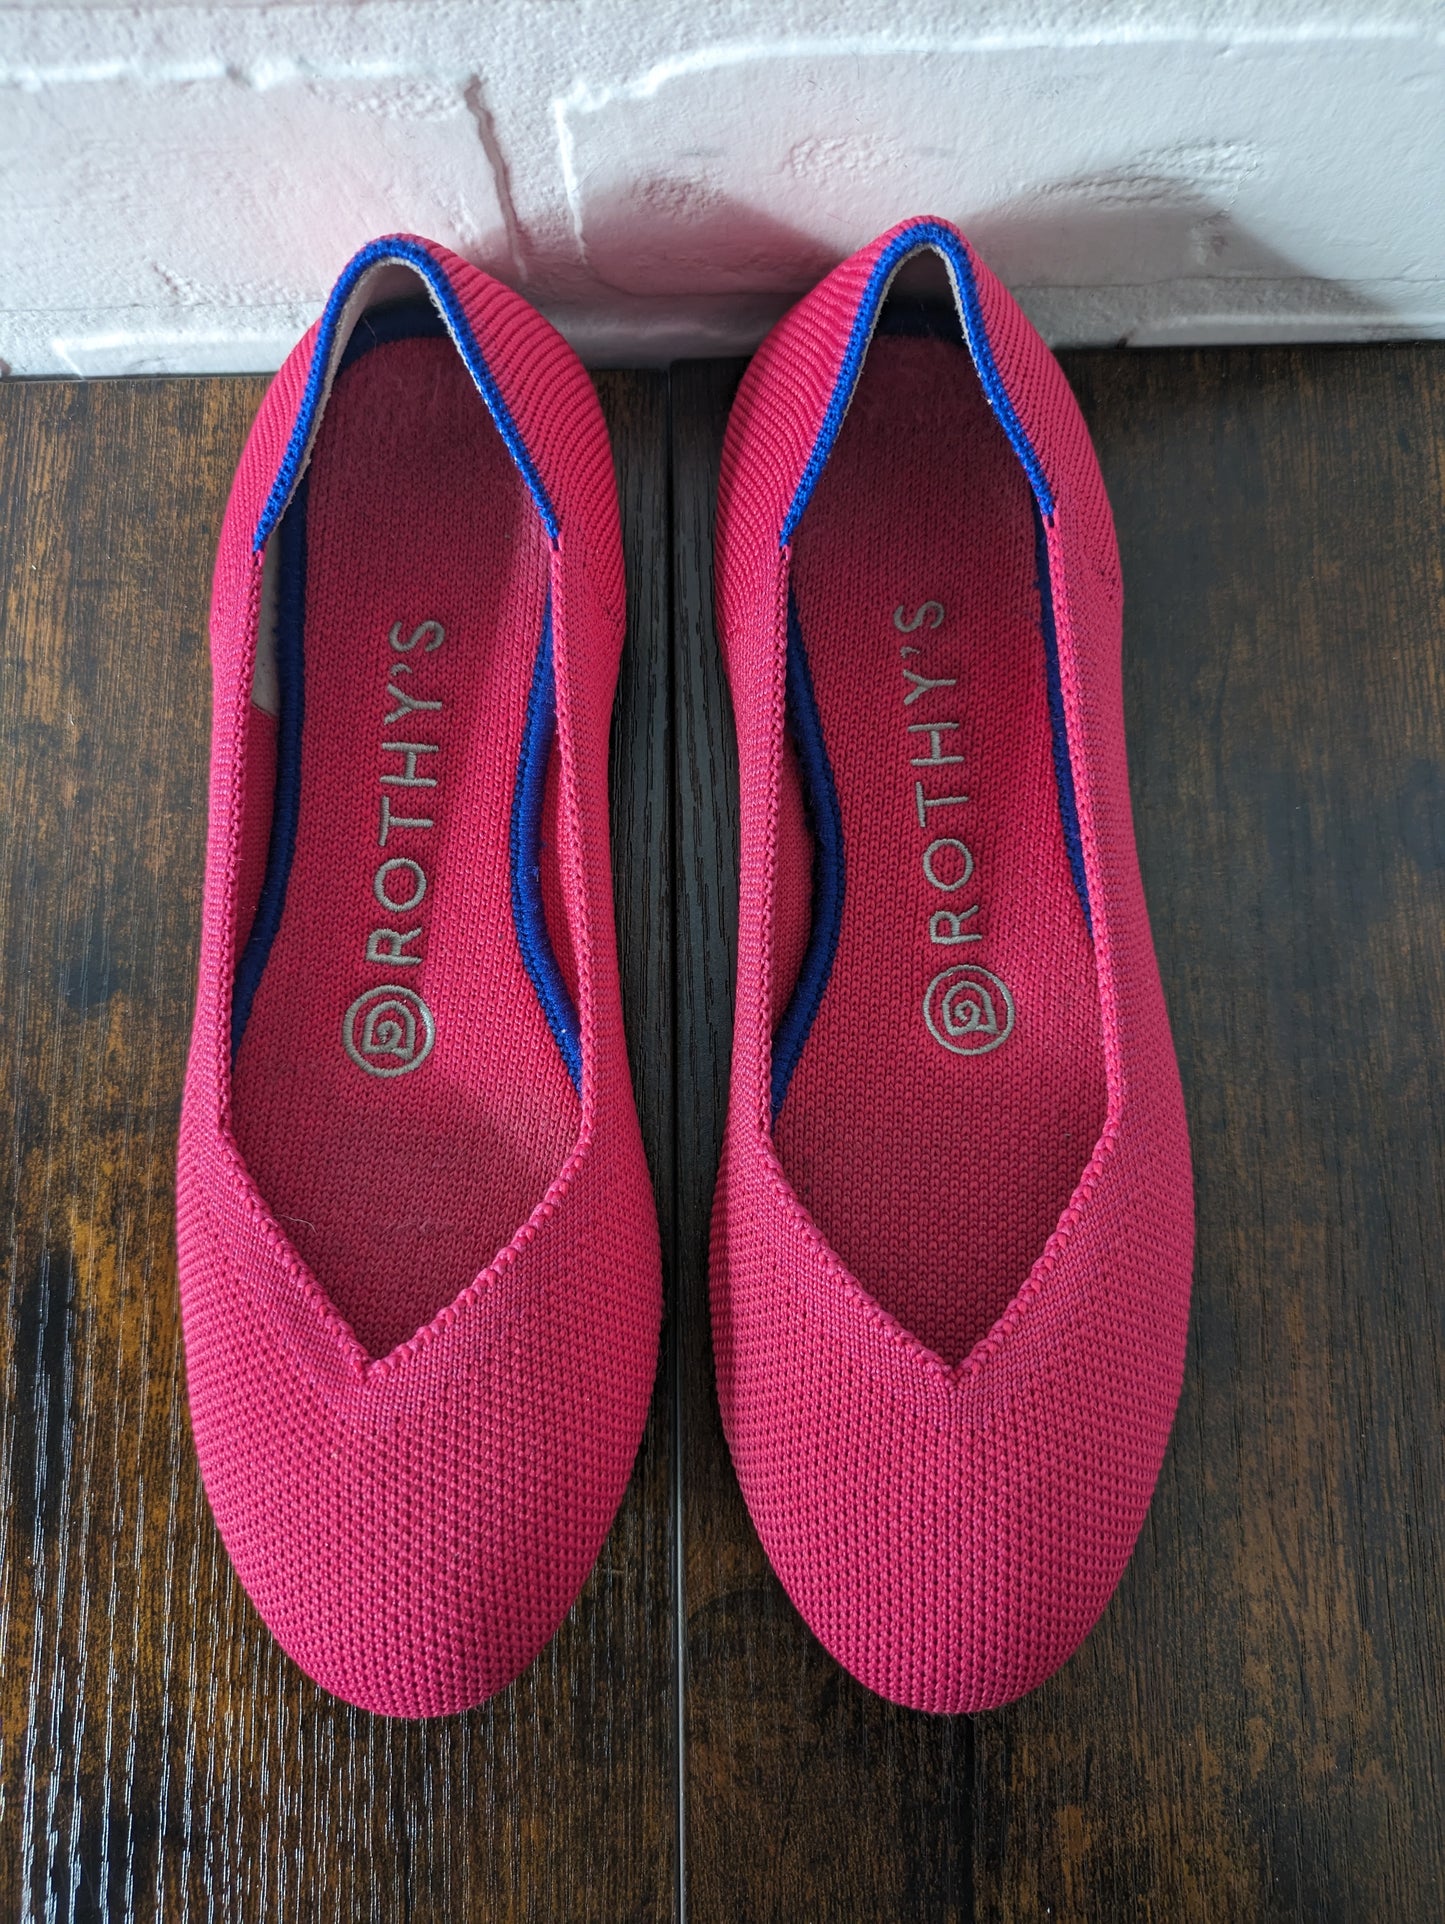 Shoes Flats Ballet By Rothys  Size: 5